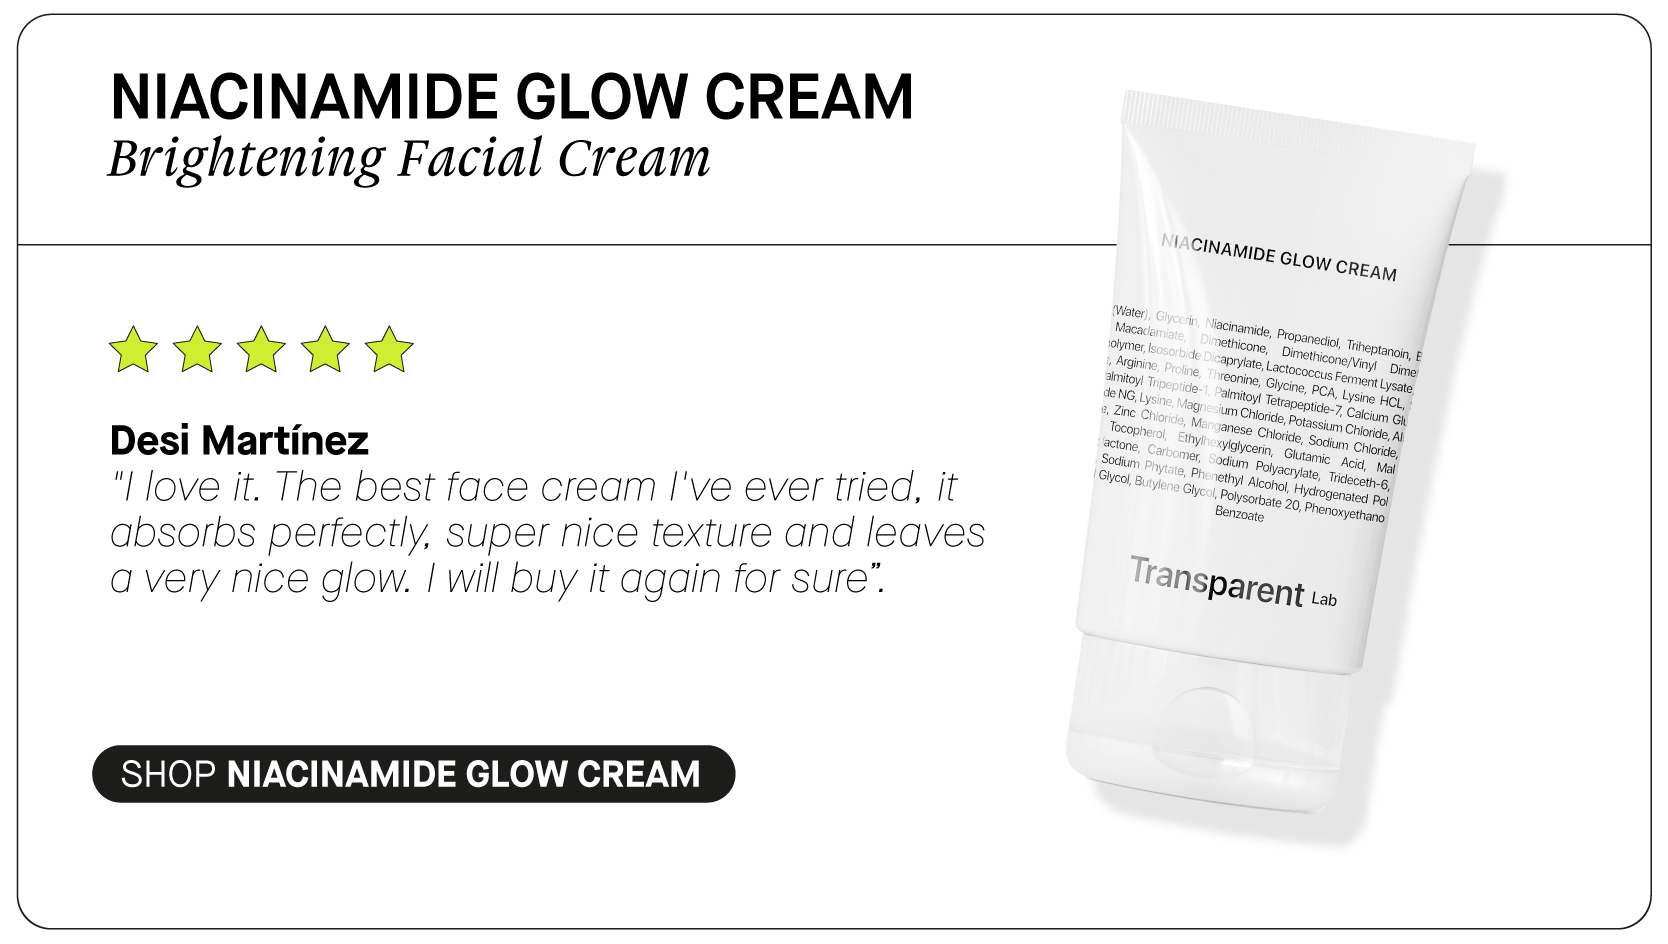  NIACINAMIDE GLOW CREAM Brightening Facial Cream W W AW Desi Martinez I'love it. The best face cream I've ever tried, it absorbs perfectly, super nice texture and leaves a very nice glow. will buy it again for sure. SHOP NIACINAMIDE GLOW CREAM 